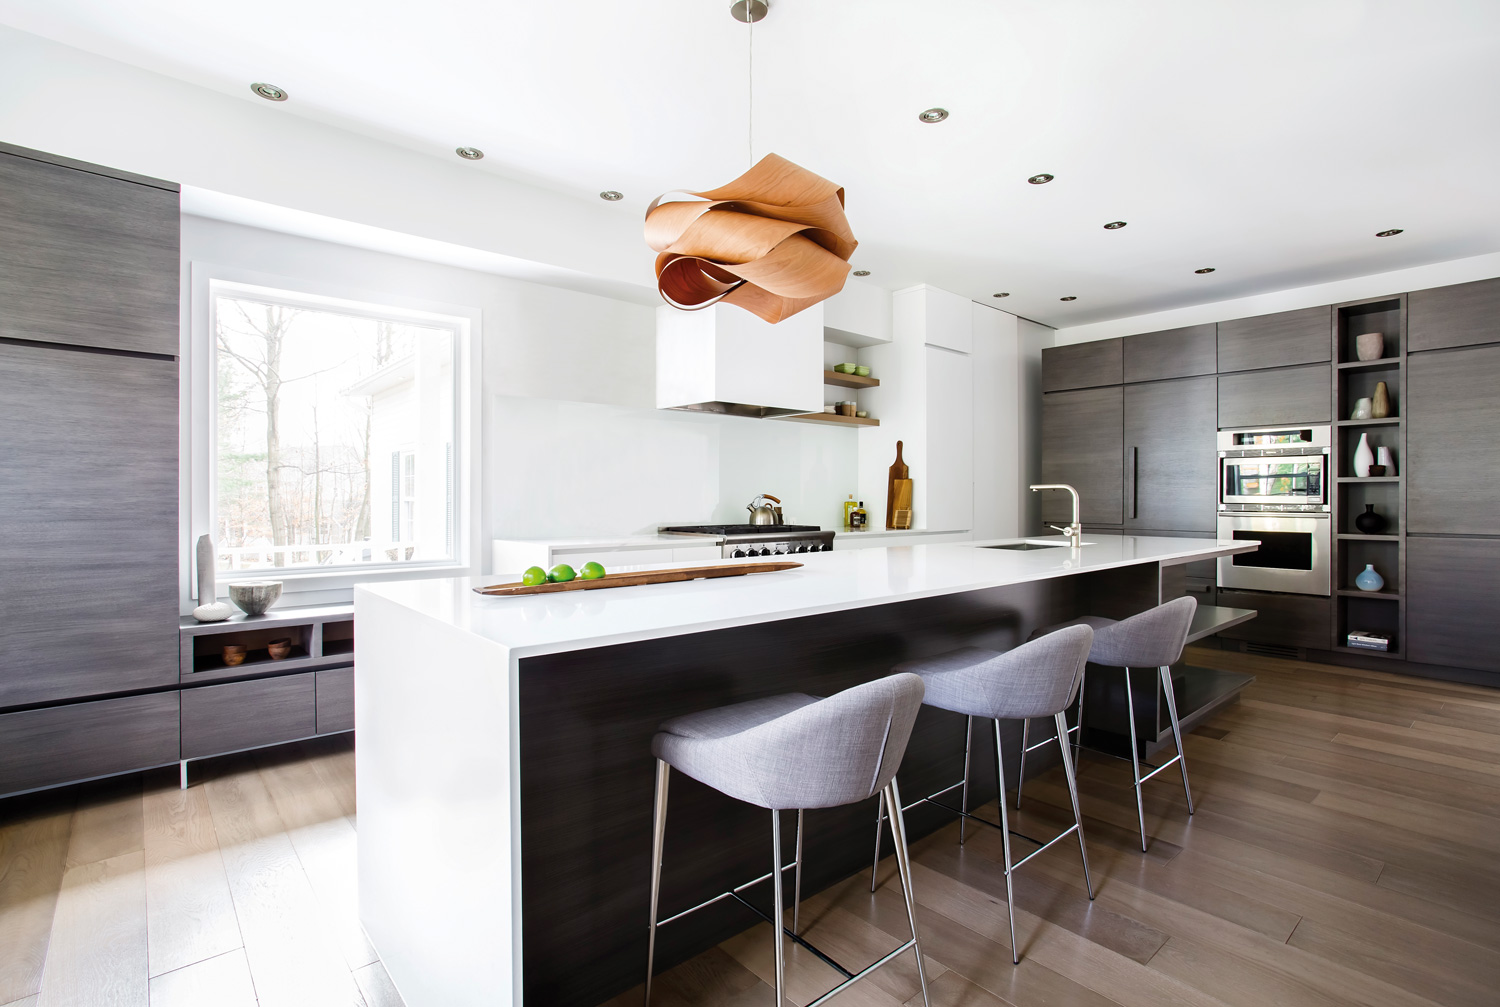 Stylish Link Pendant by LZF over a kitchen island.